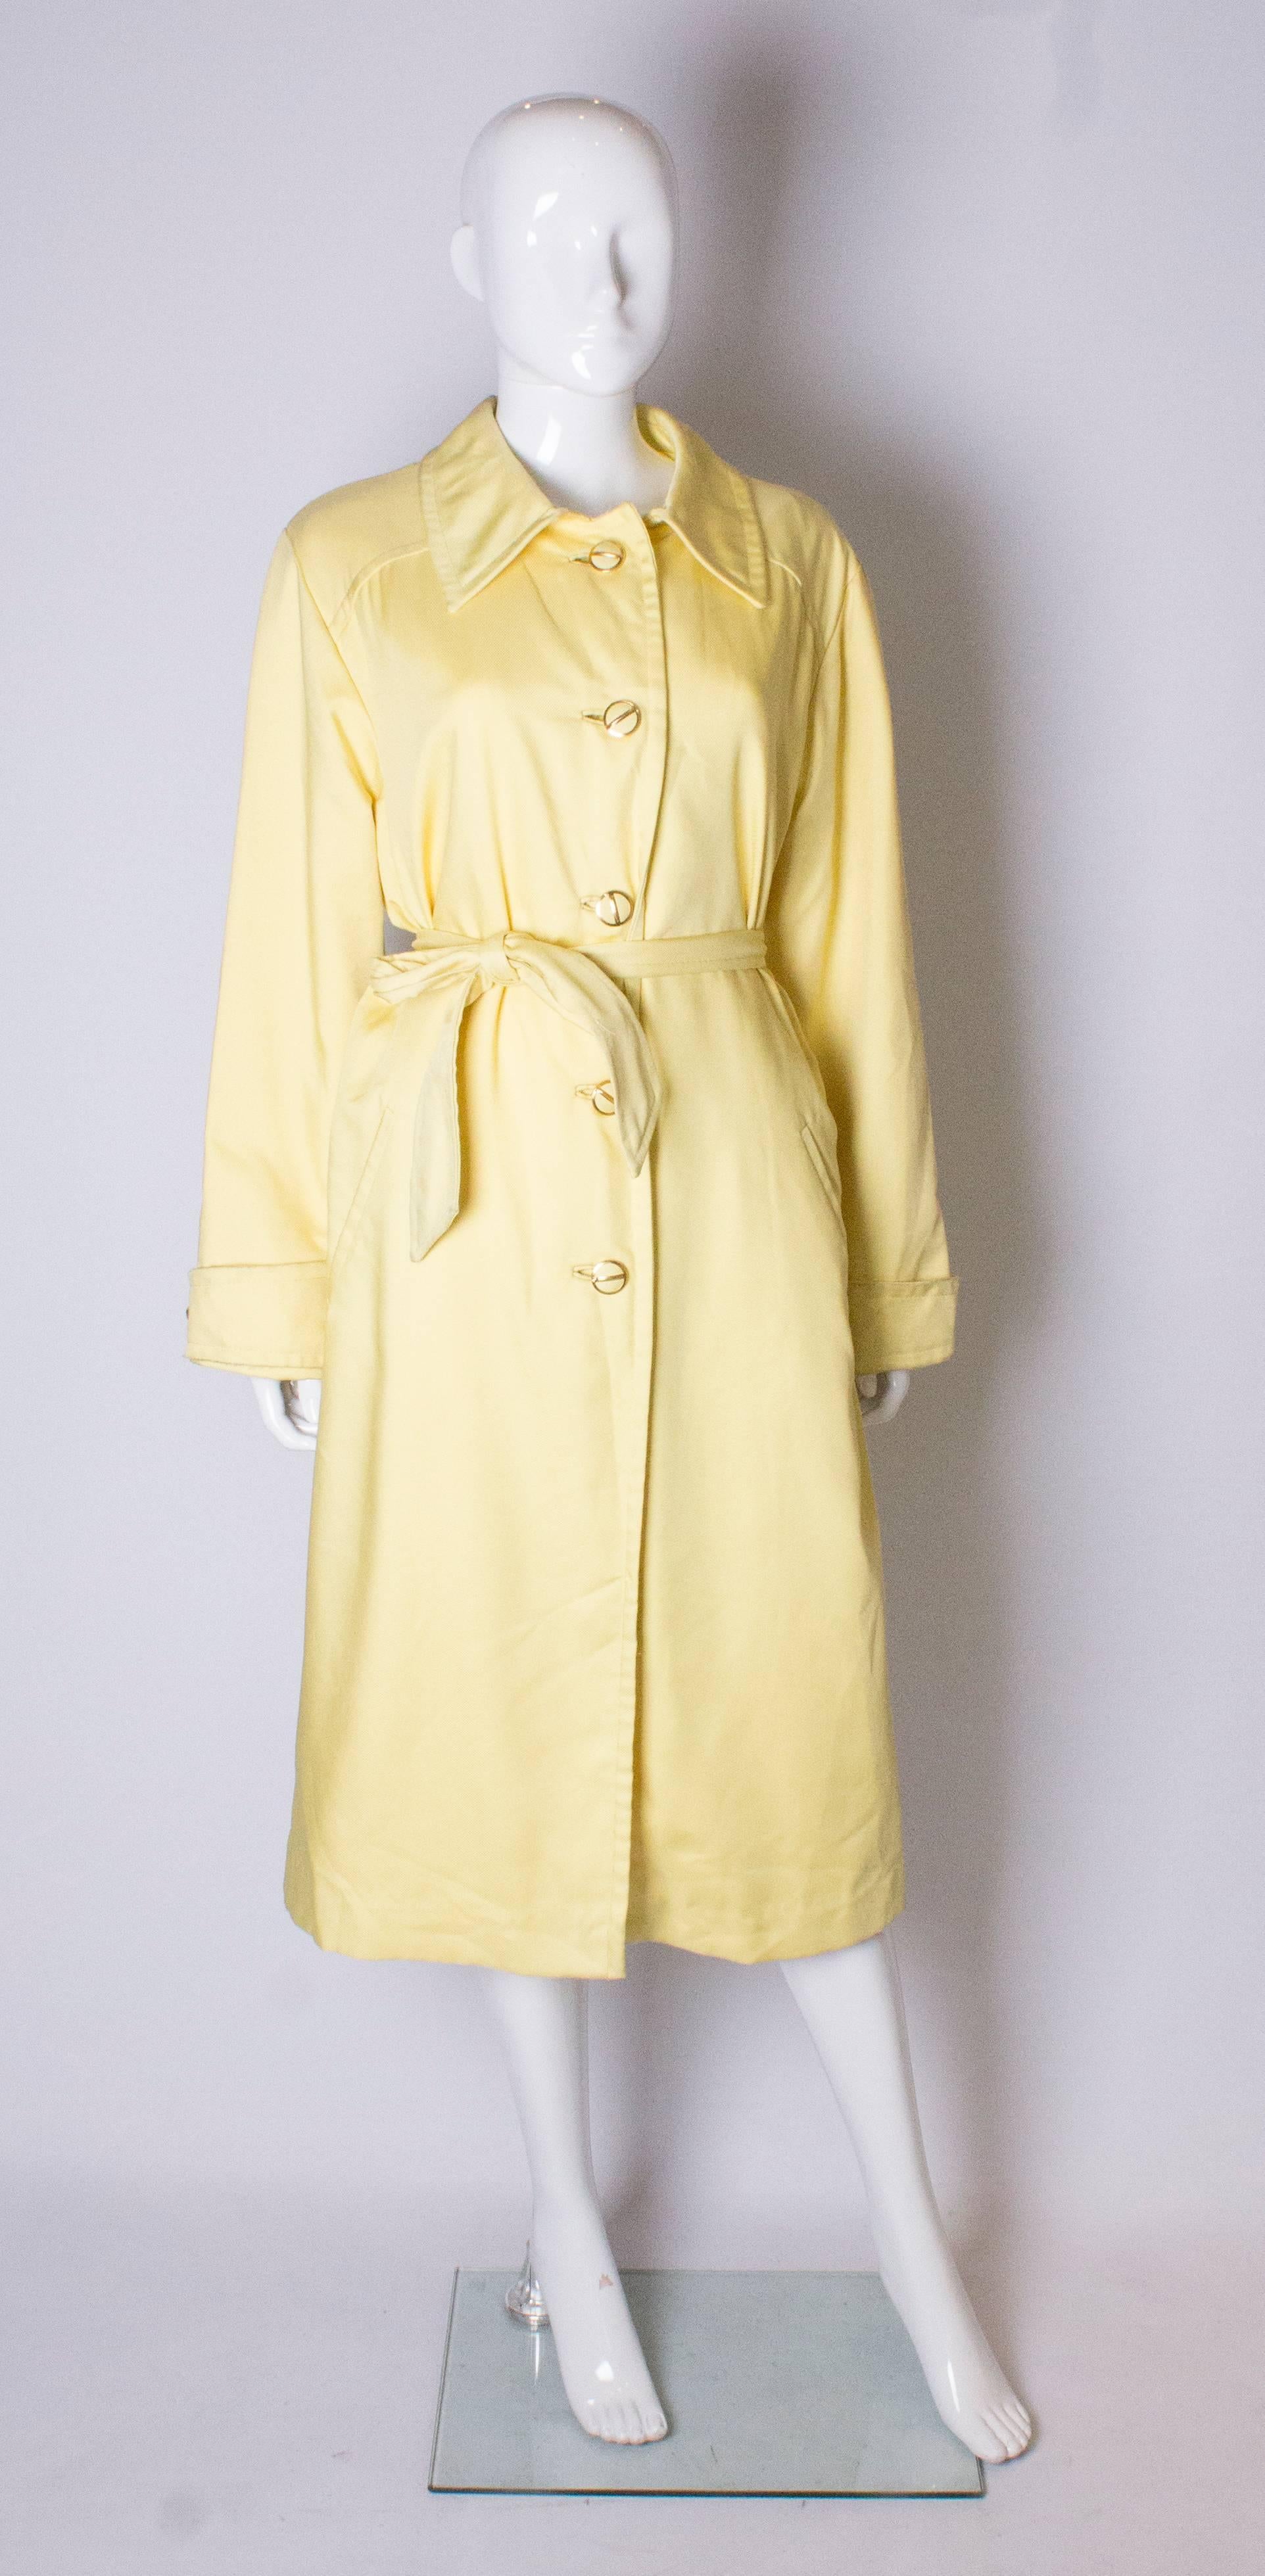 A great vintage  coat for Spring. The coat has a fabric covered buttons and a self fabric belt.